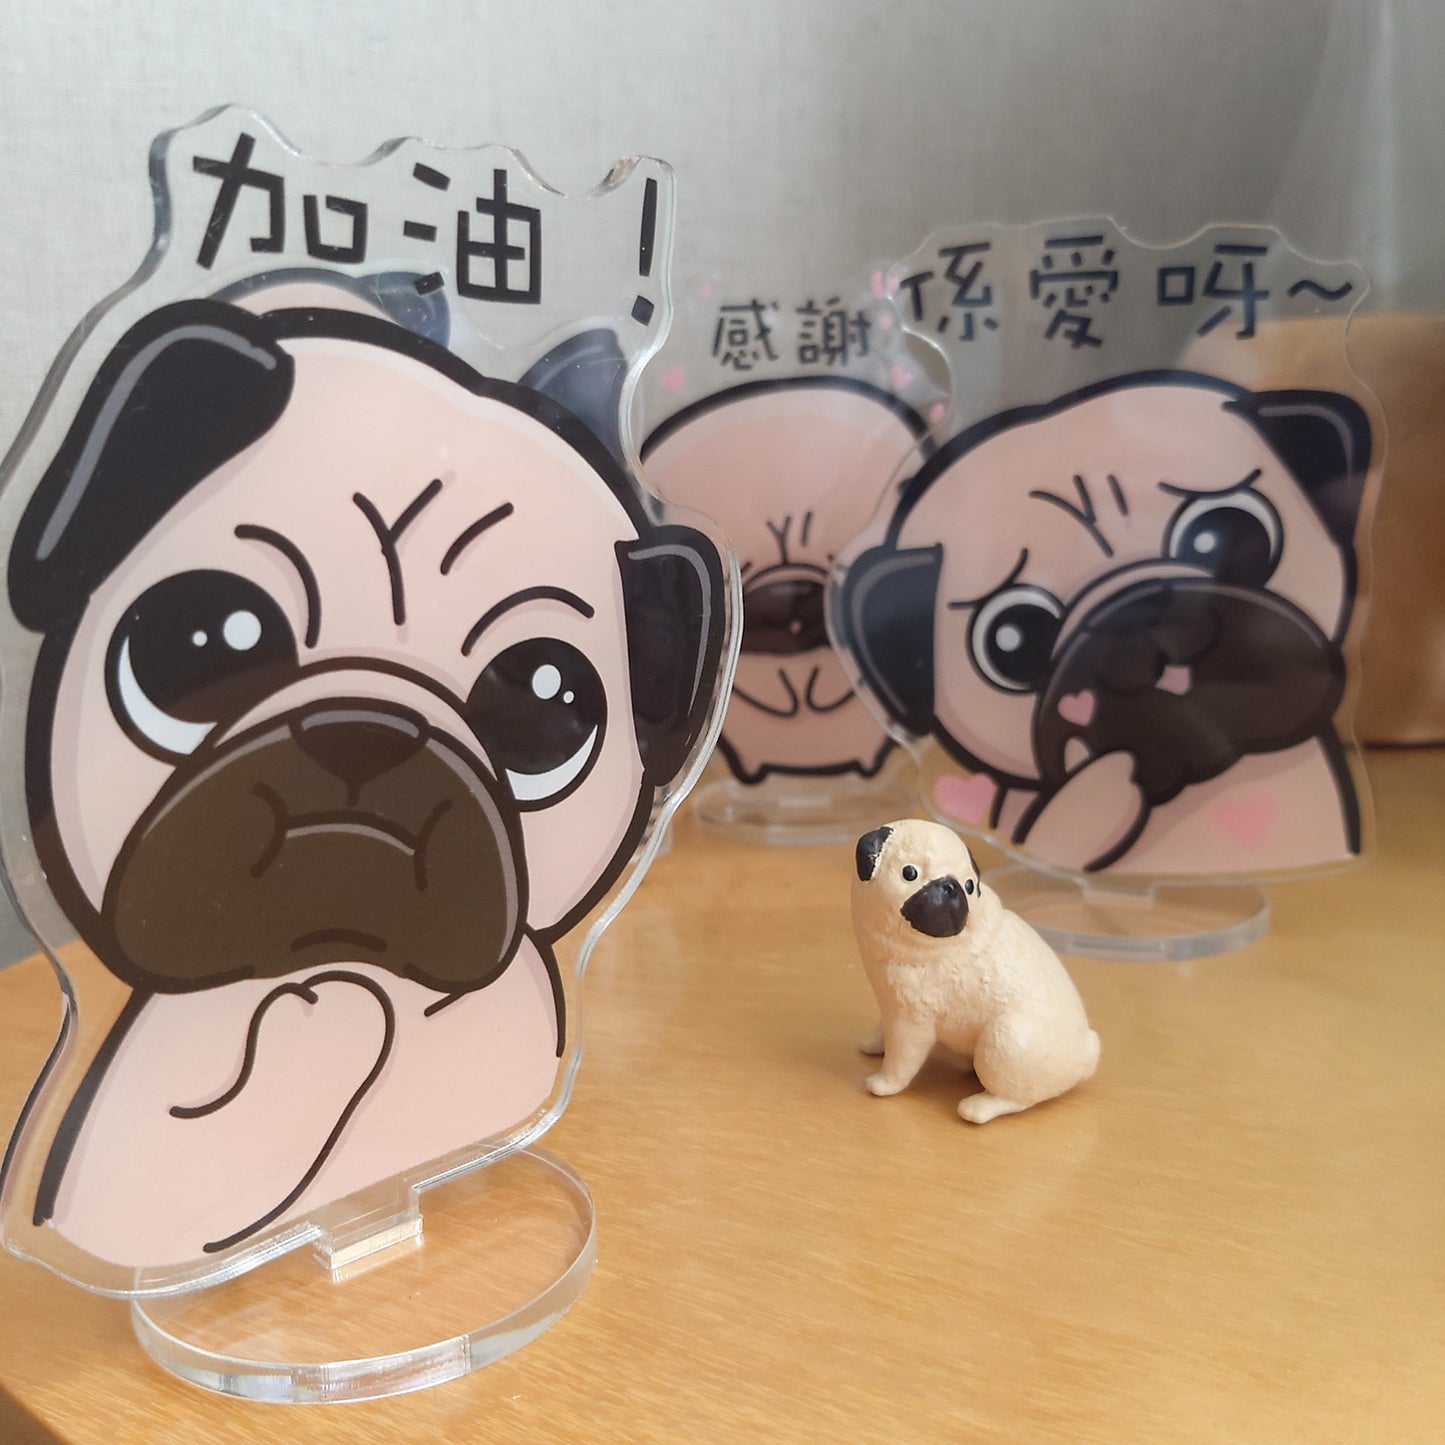 Hug Mike the puggy double-sided message stand